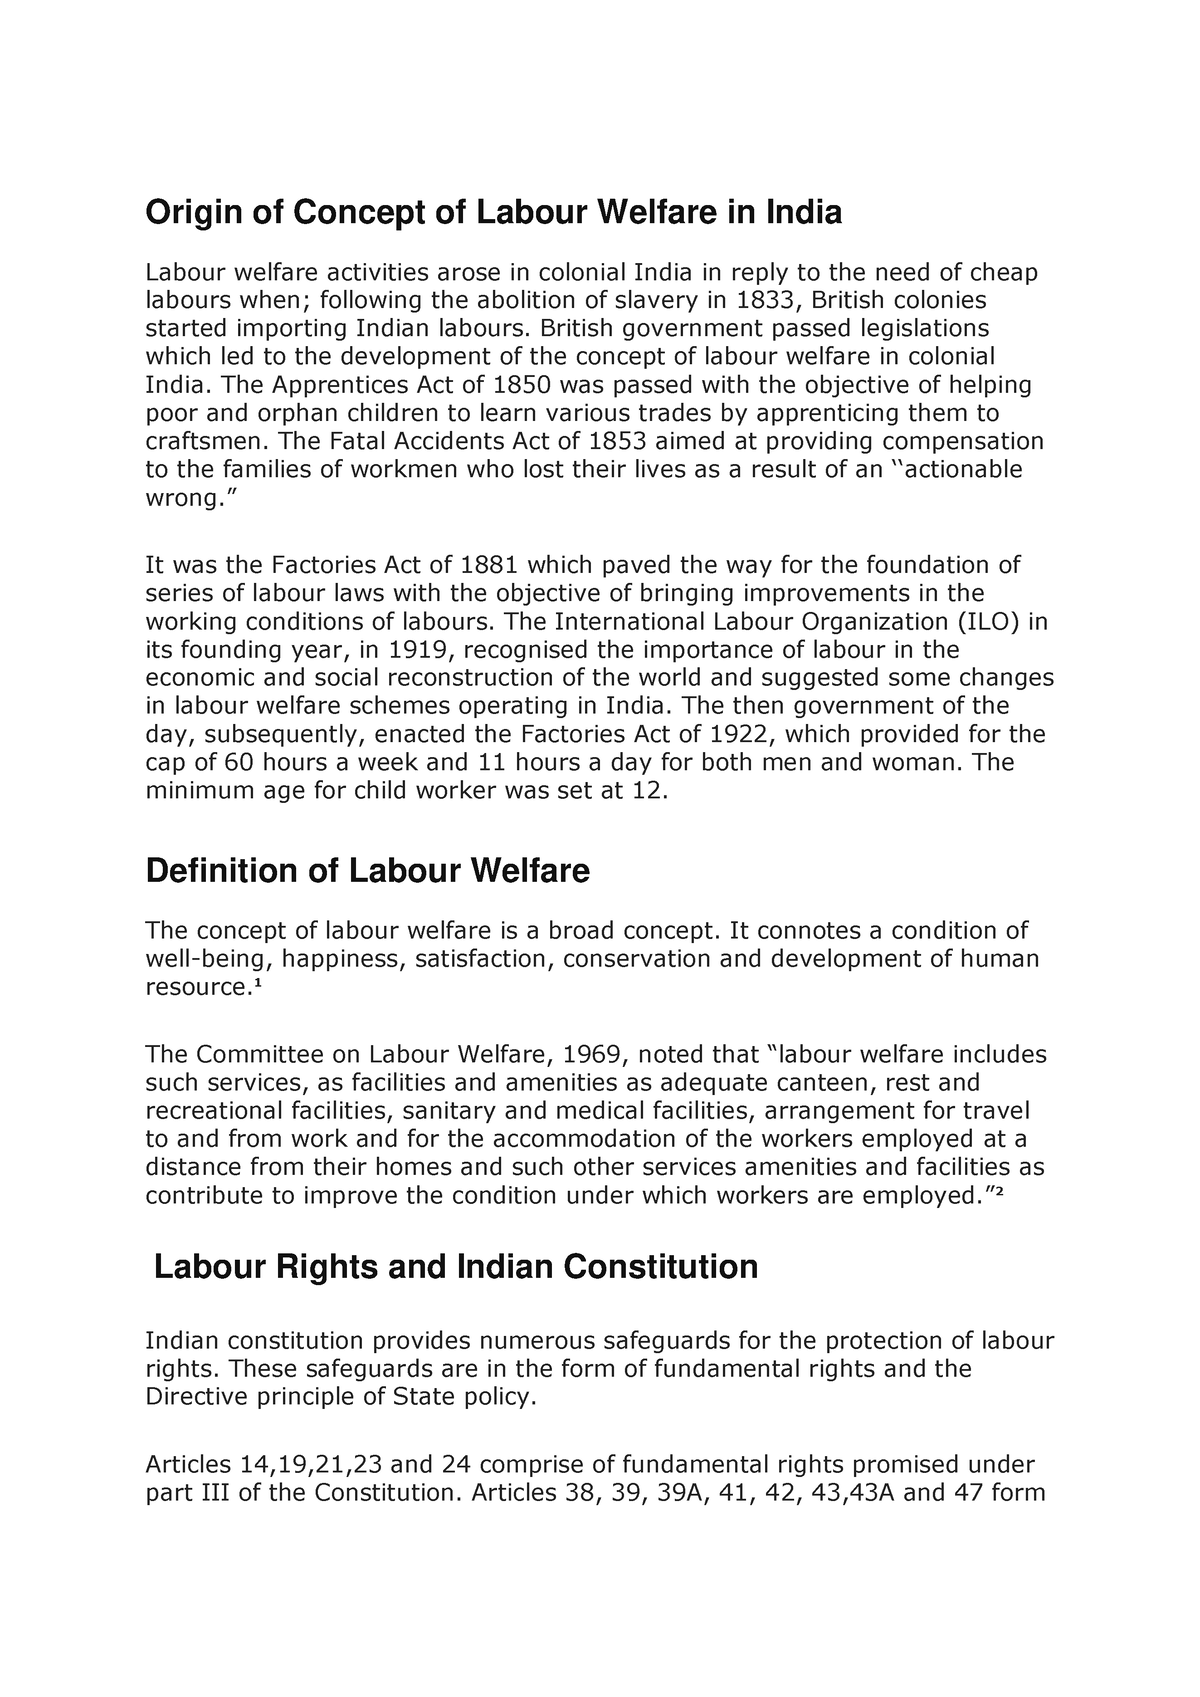 case study on labour welfare in india